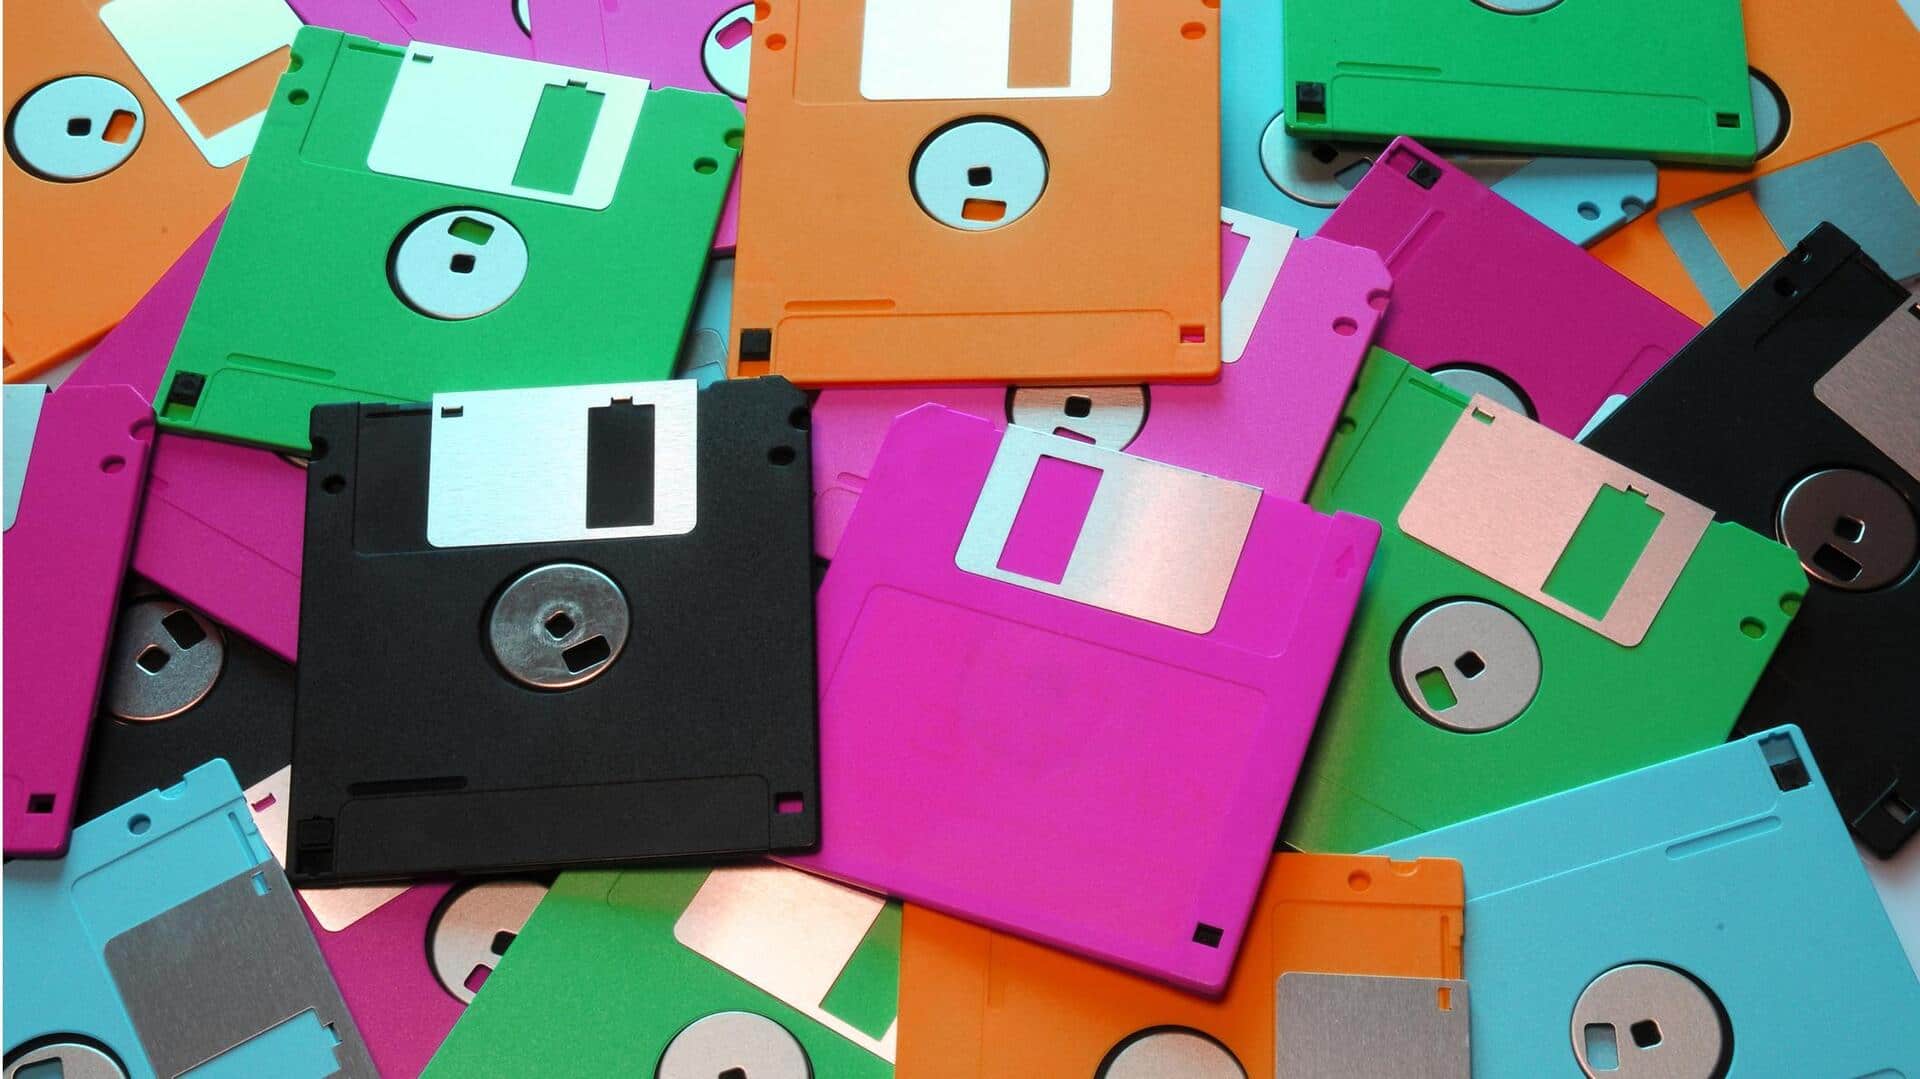 Floppy farewell! Japan ends its love affair with outdated disks